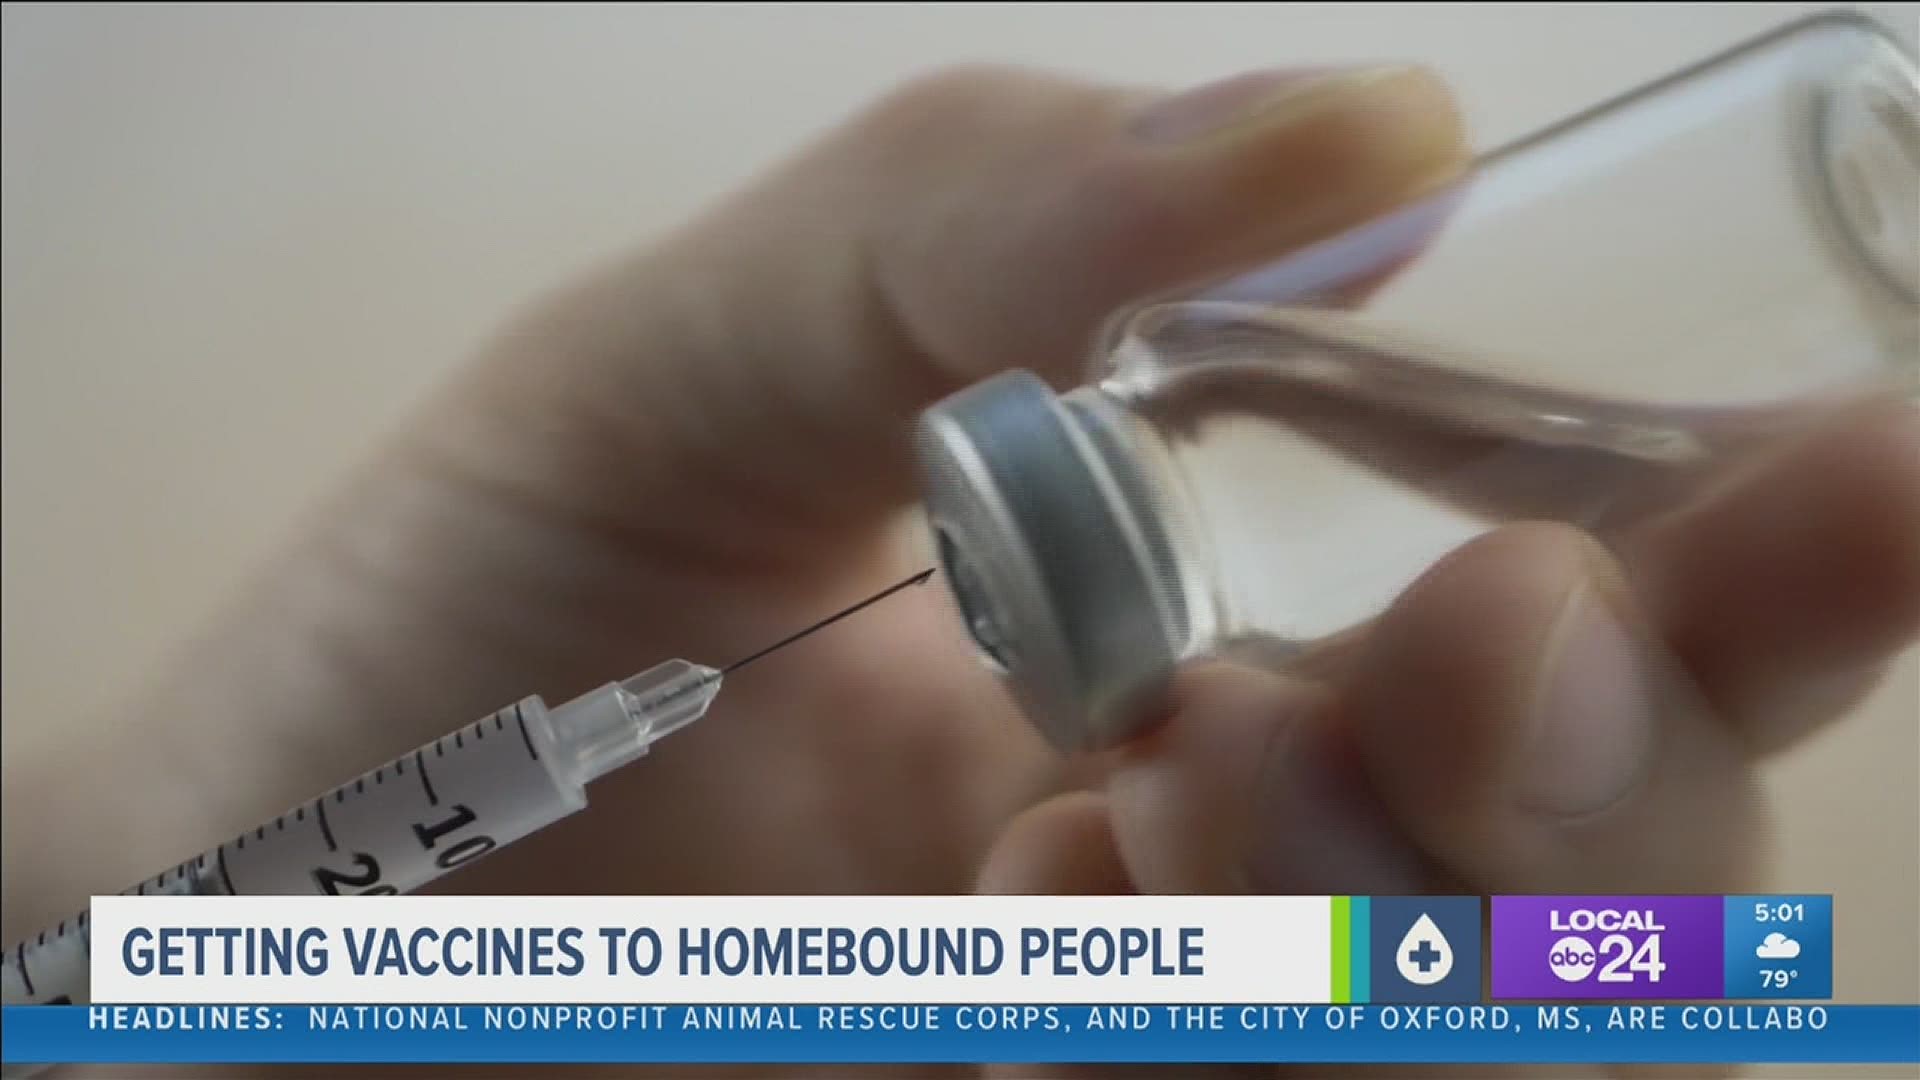 The Shelby County Health Department said a new health directive will go into effect Wednesday, and an effort will begin to vaccinate those stuck at home.